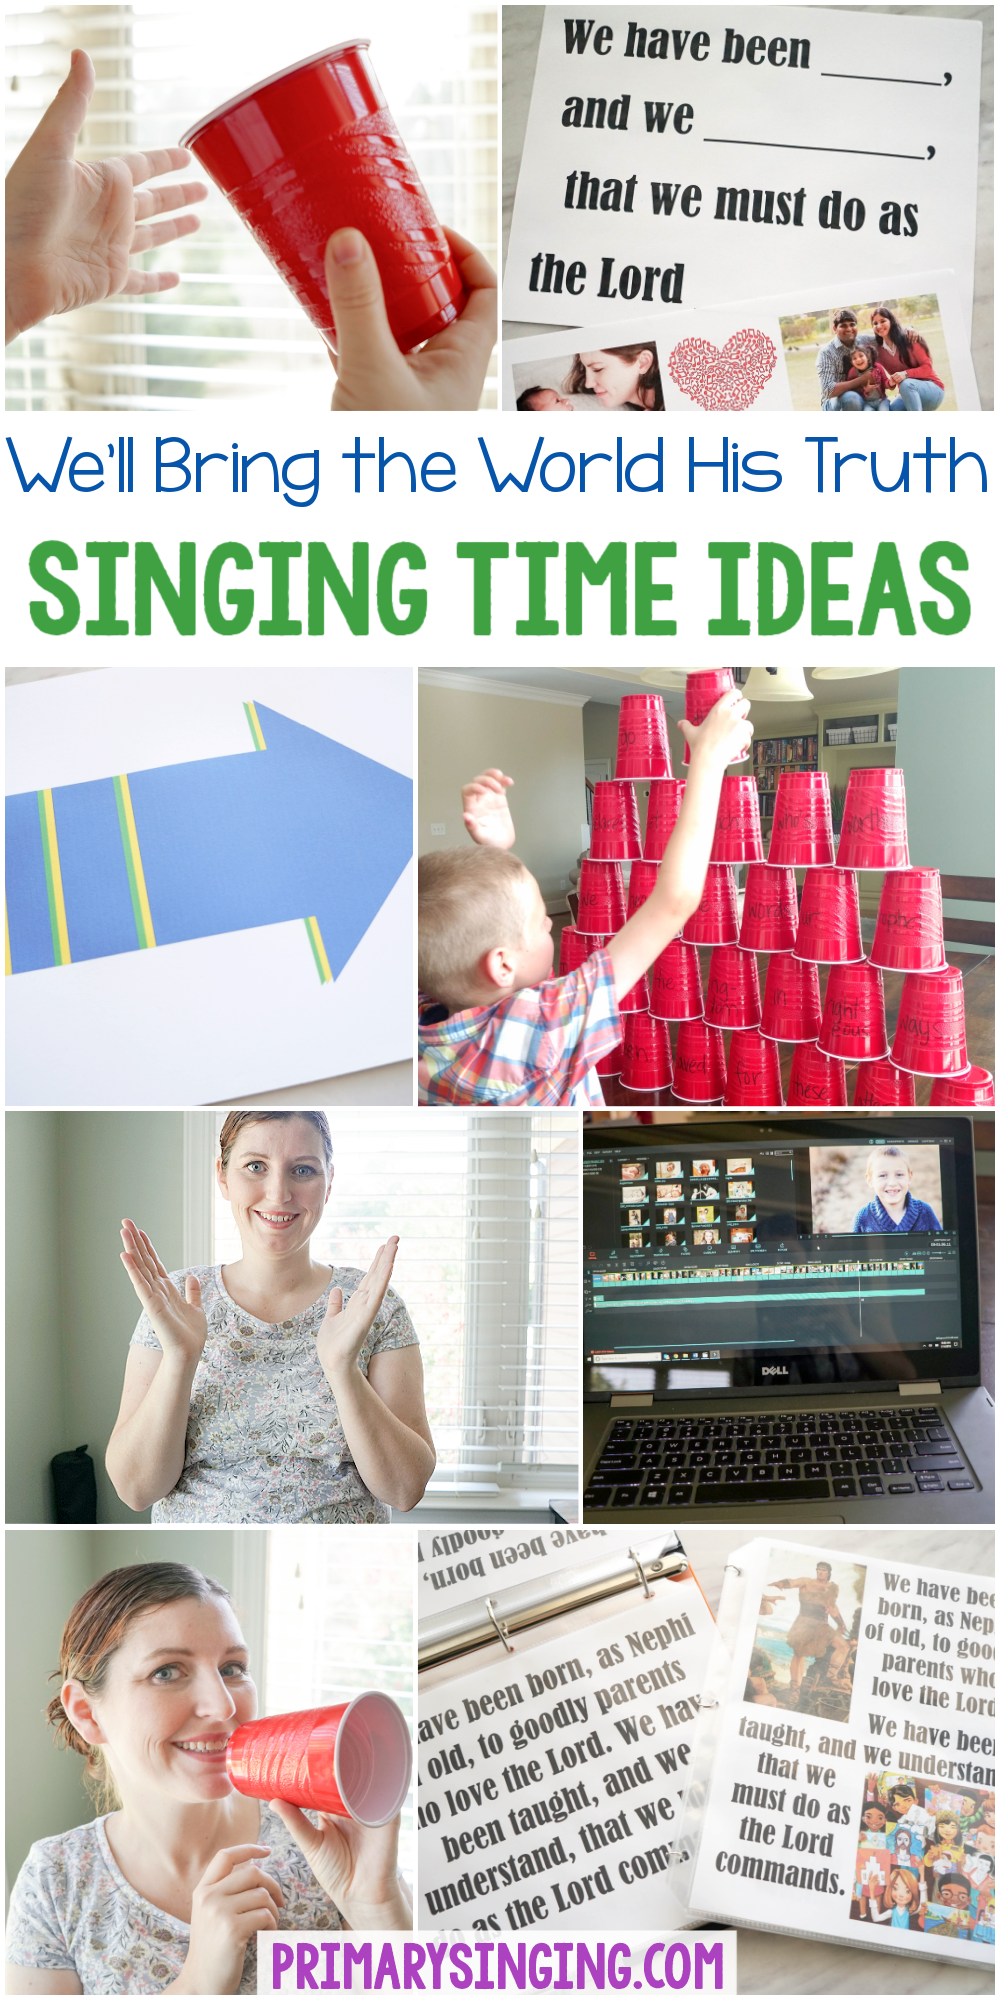 25 Singing time lesson plans and ideas for We'll Bring the World His Truth - a resource for LDS Primary choristers / music leaders including printable song helps and lots of fun teaching ideas! Cup patterns, fill in the blank, beat vs rhythm and many more! #PrimarySinging #LDS #Primary